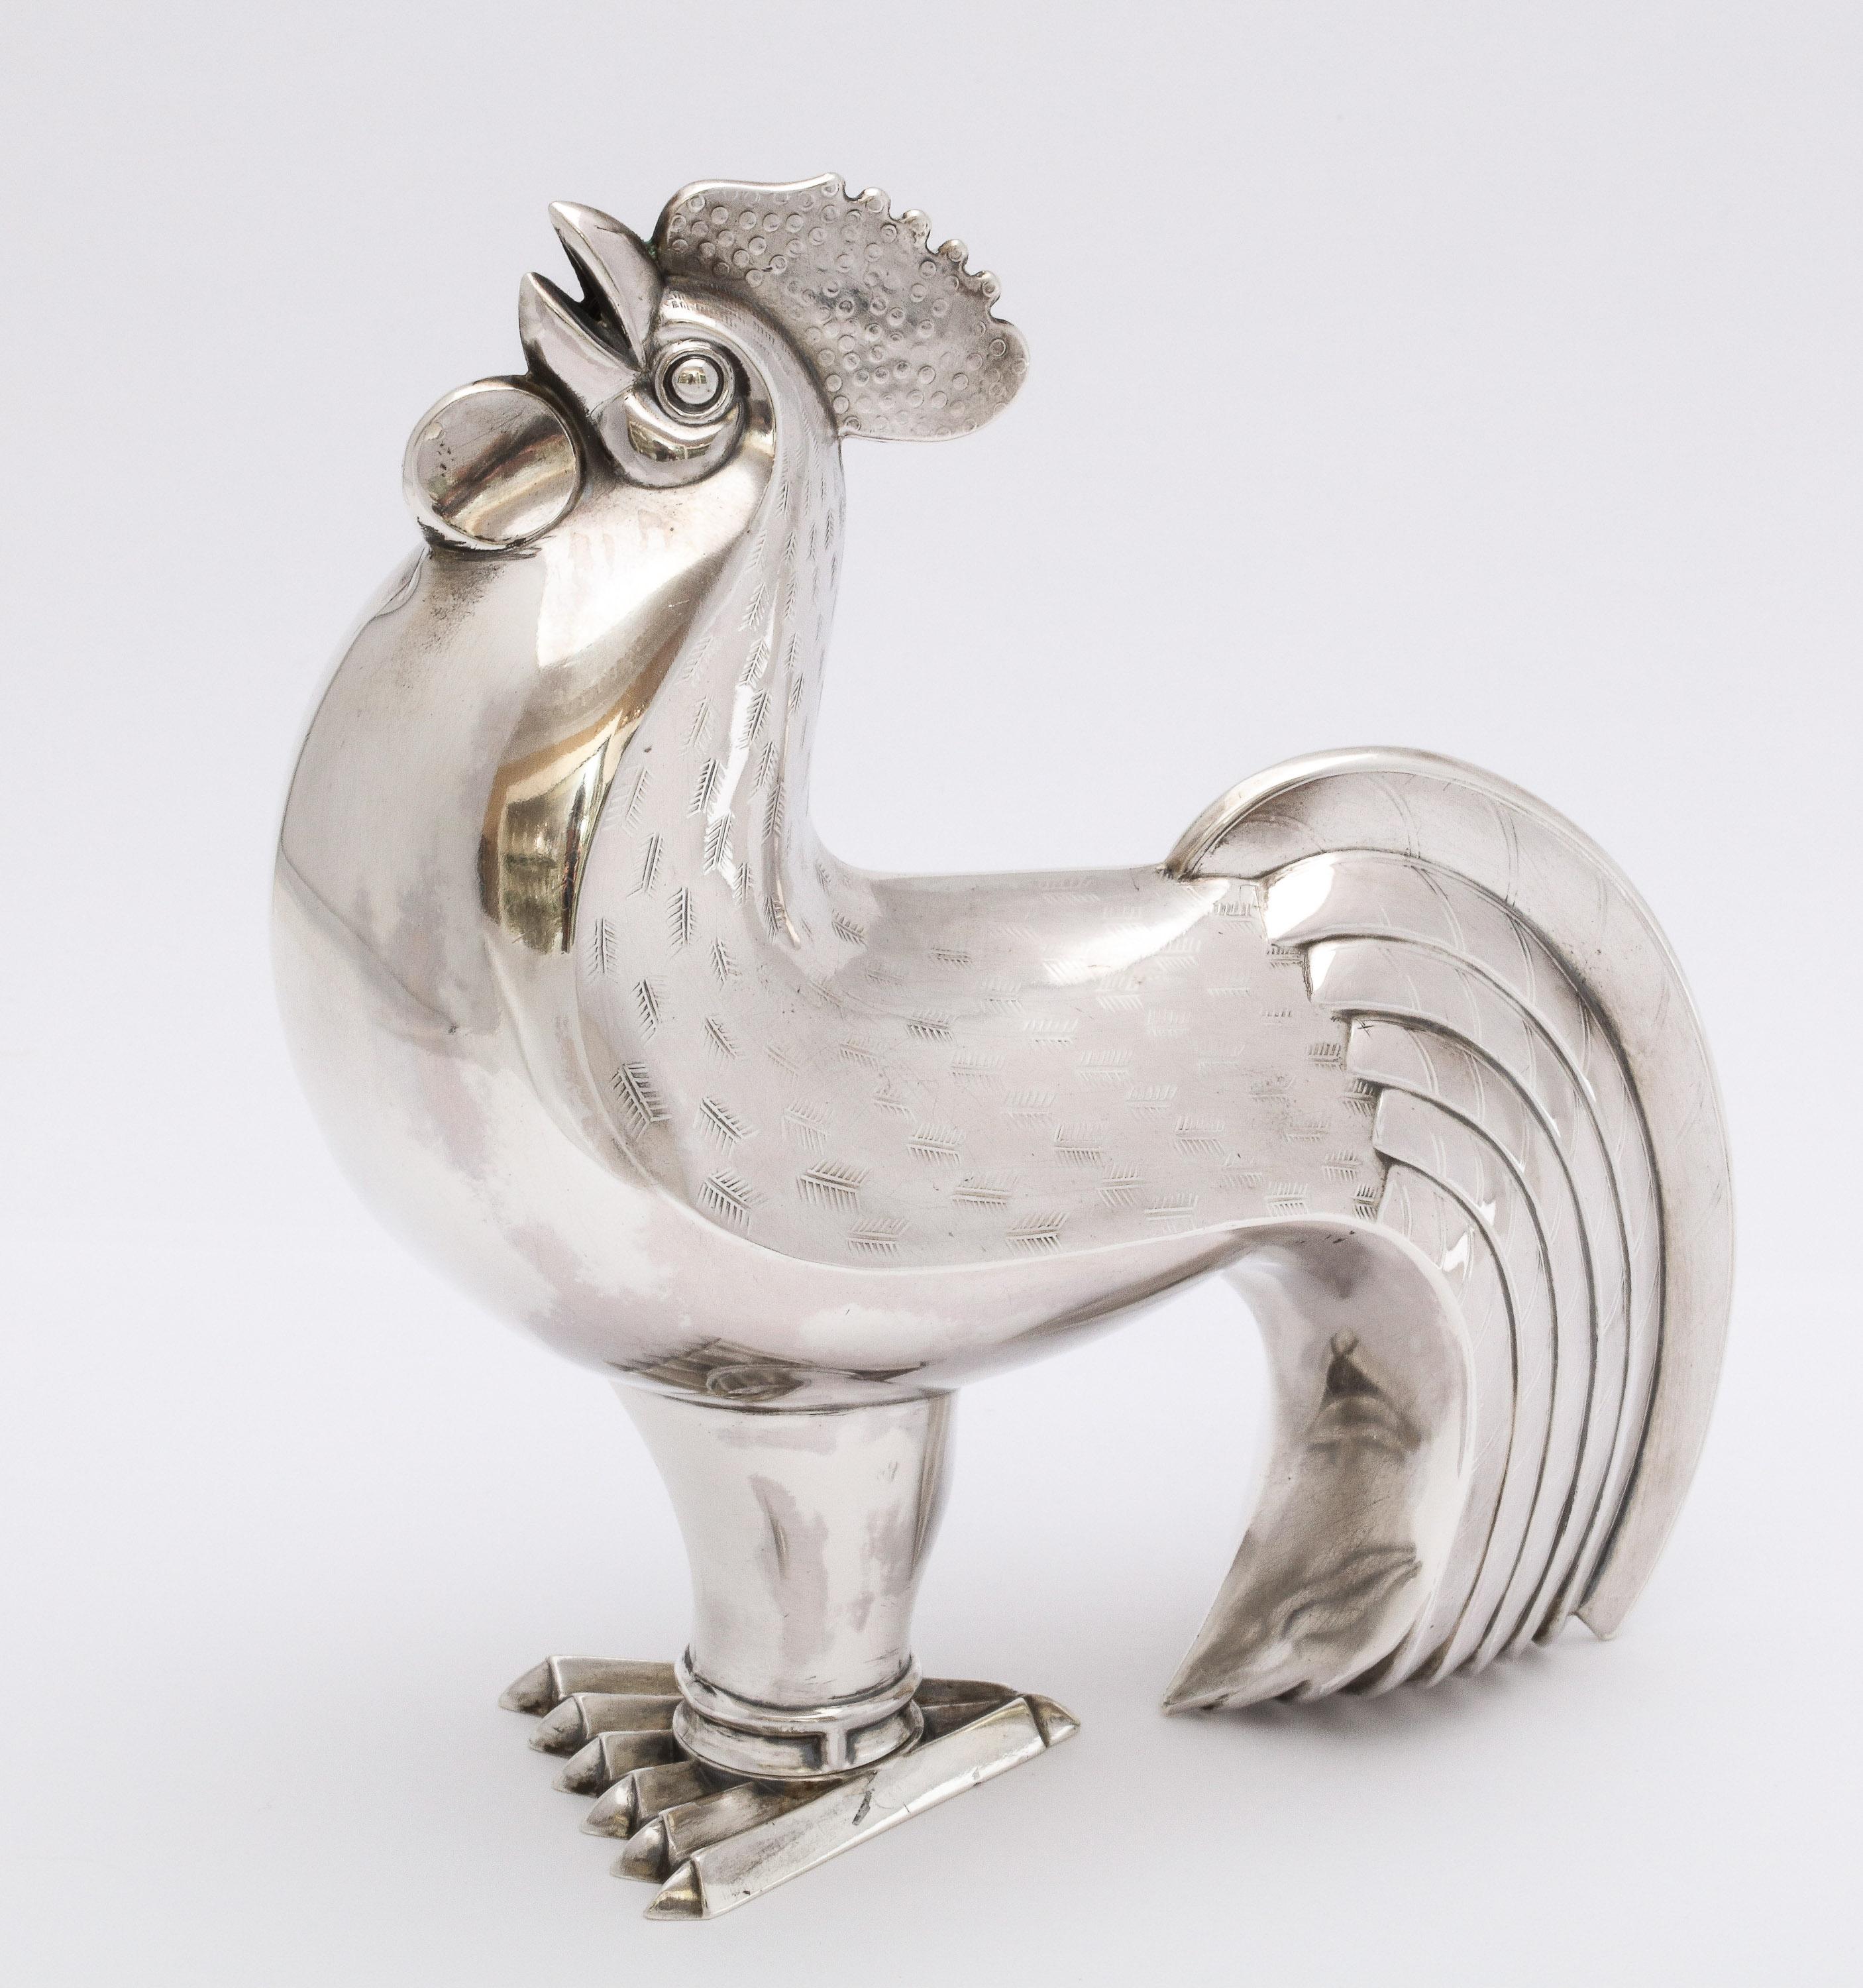 Early 20th Century Art Deco Norwegian Sterling Silver Rooster-Form Sugar Caster by Tostrup